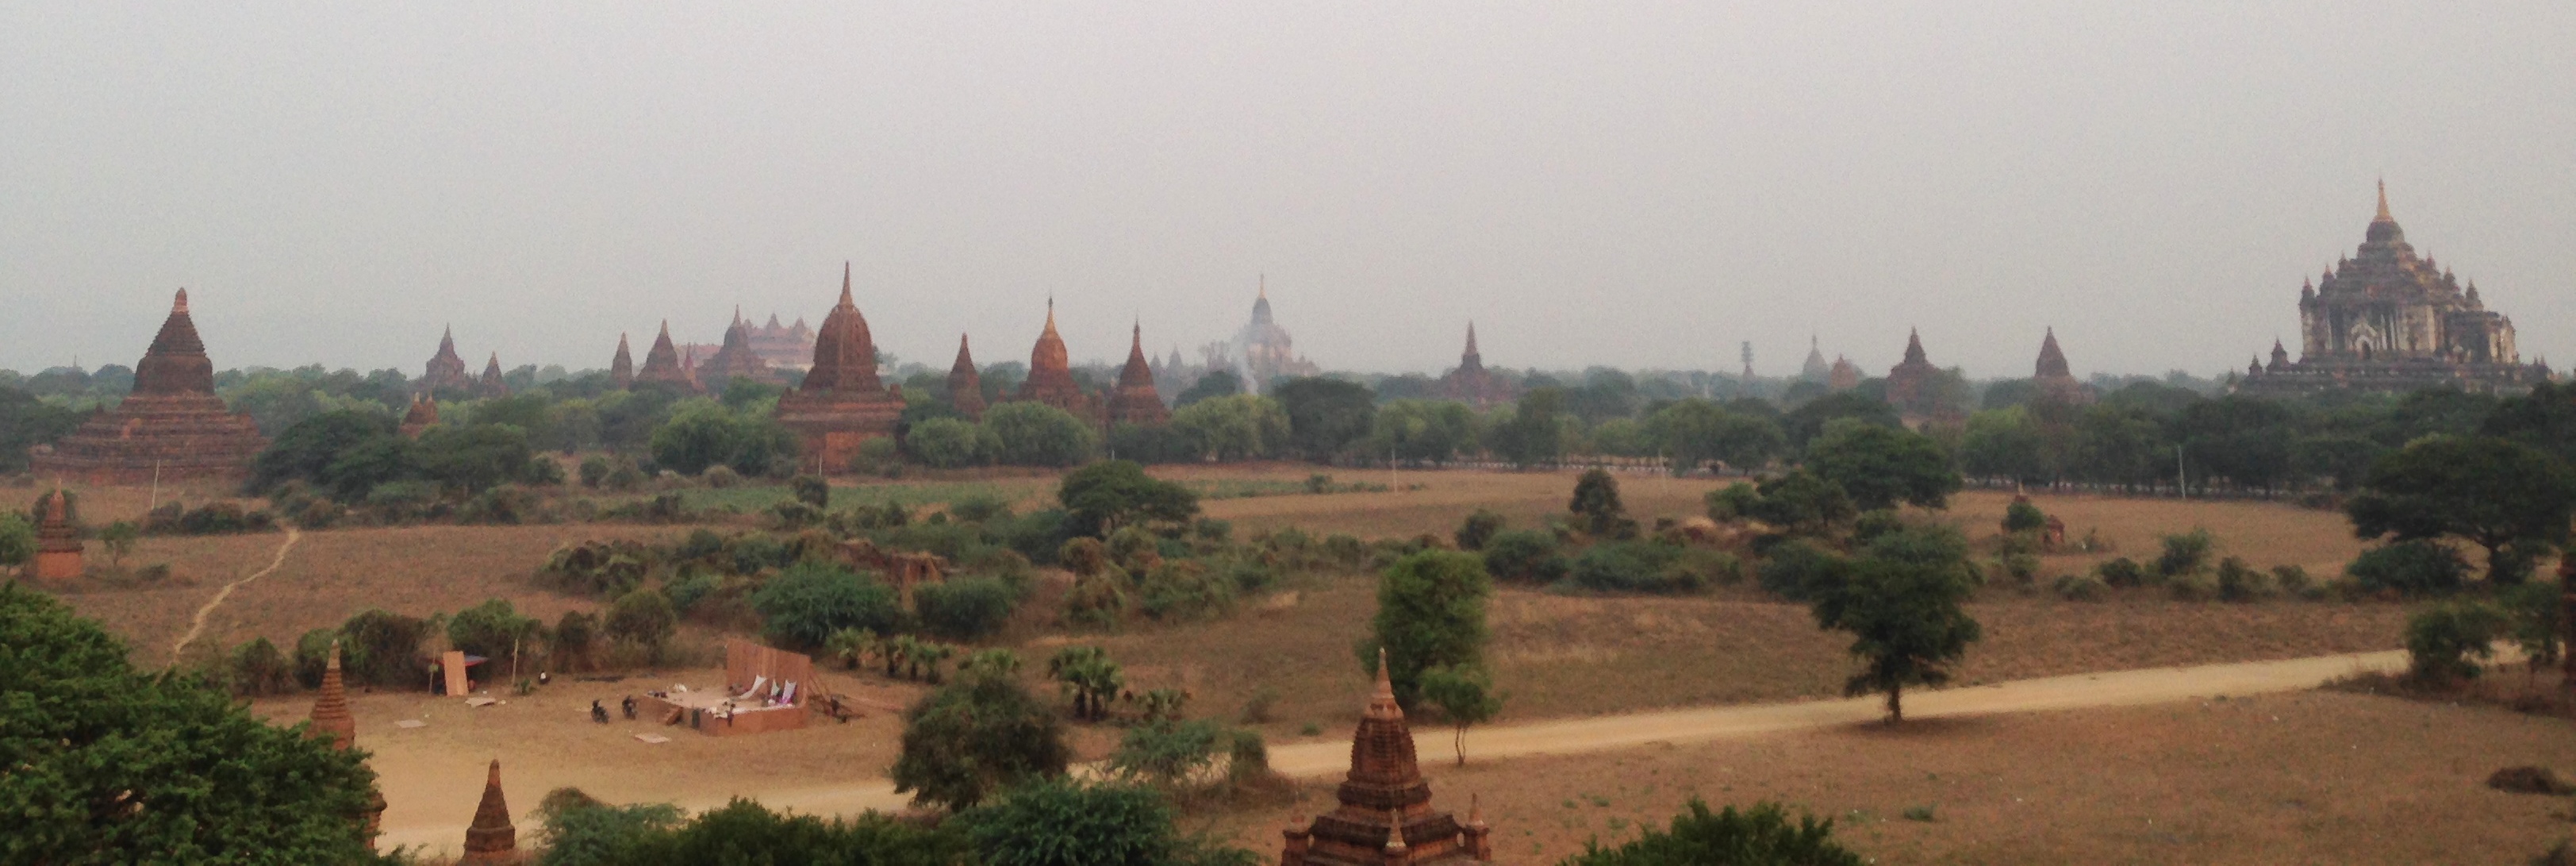 Visiting Myanmar Reflections and Advice - Wild About Travel